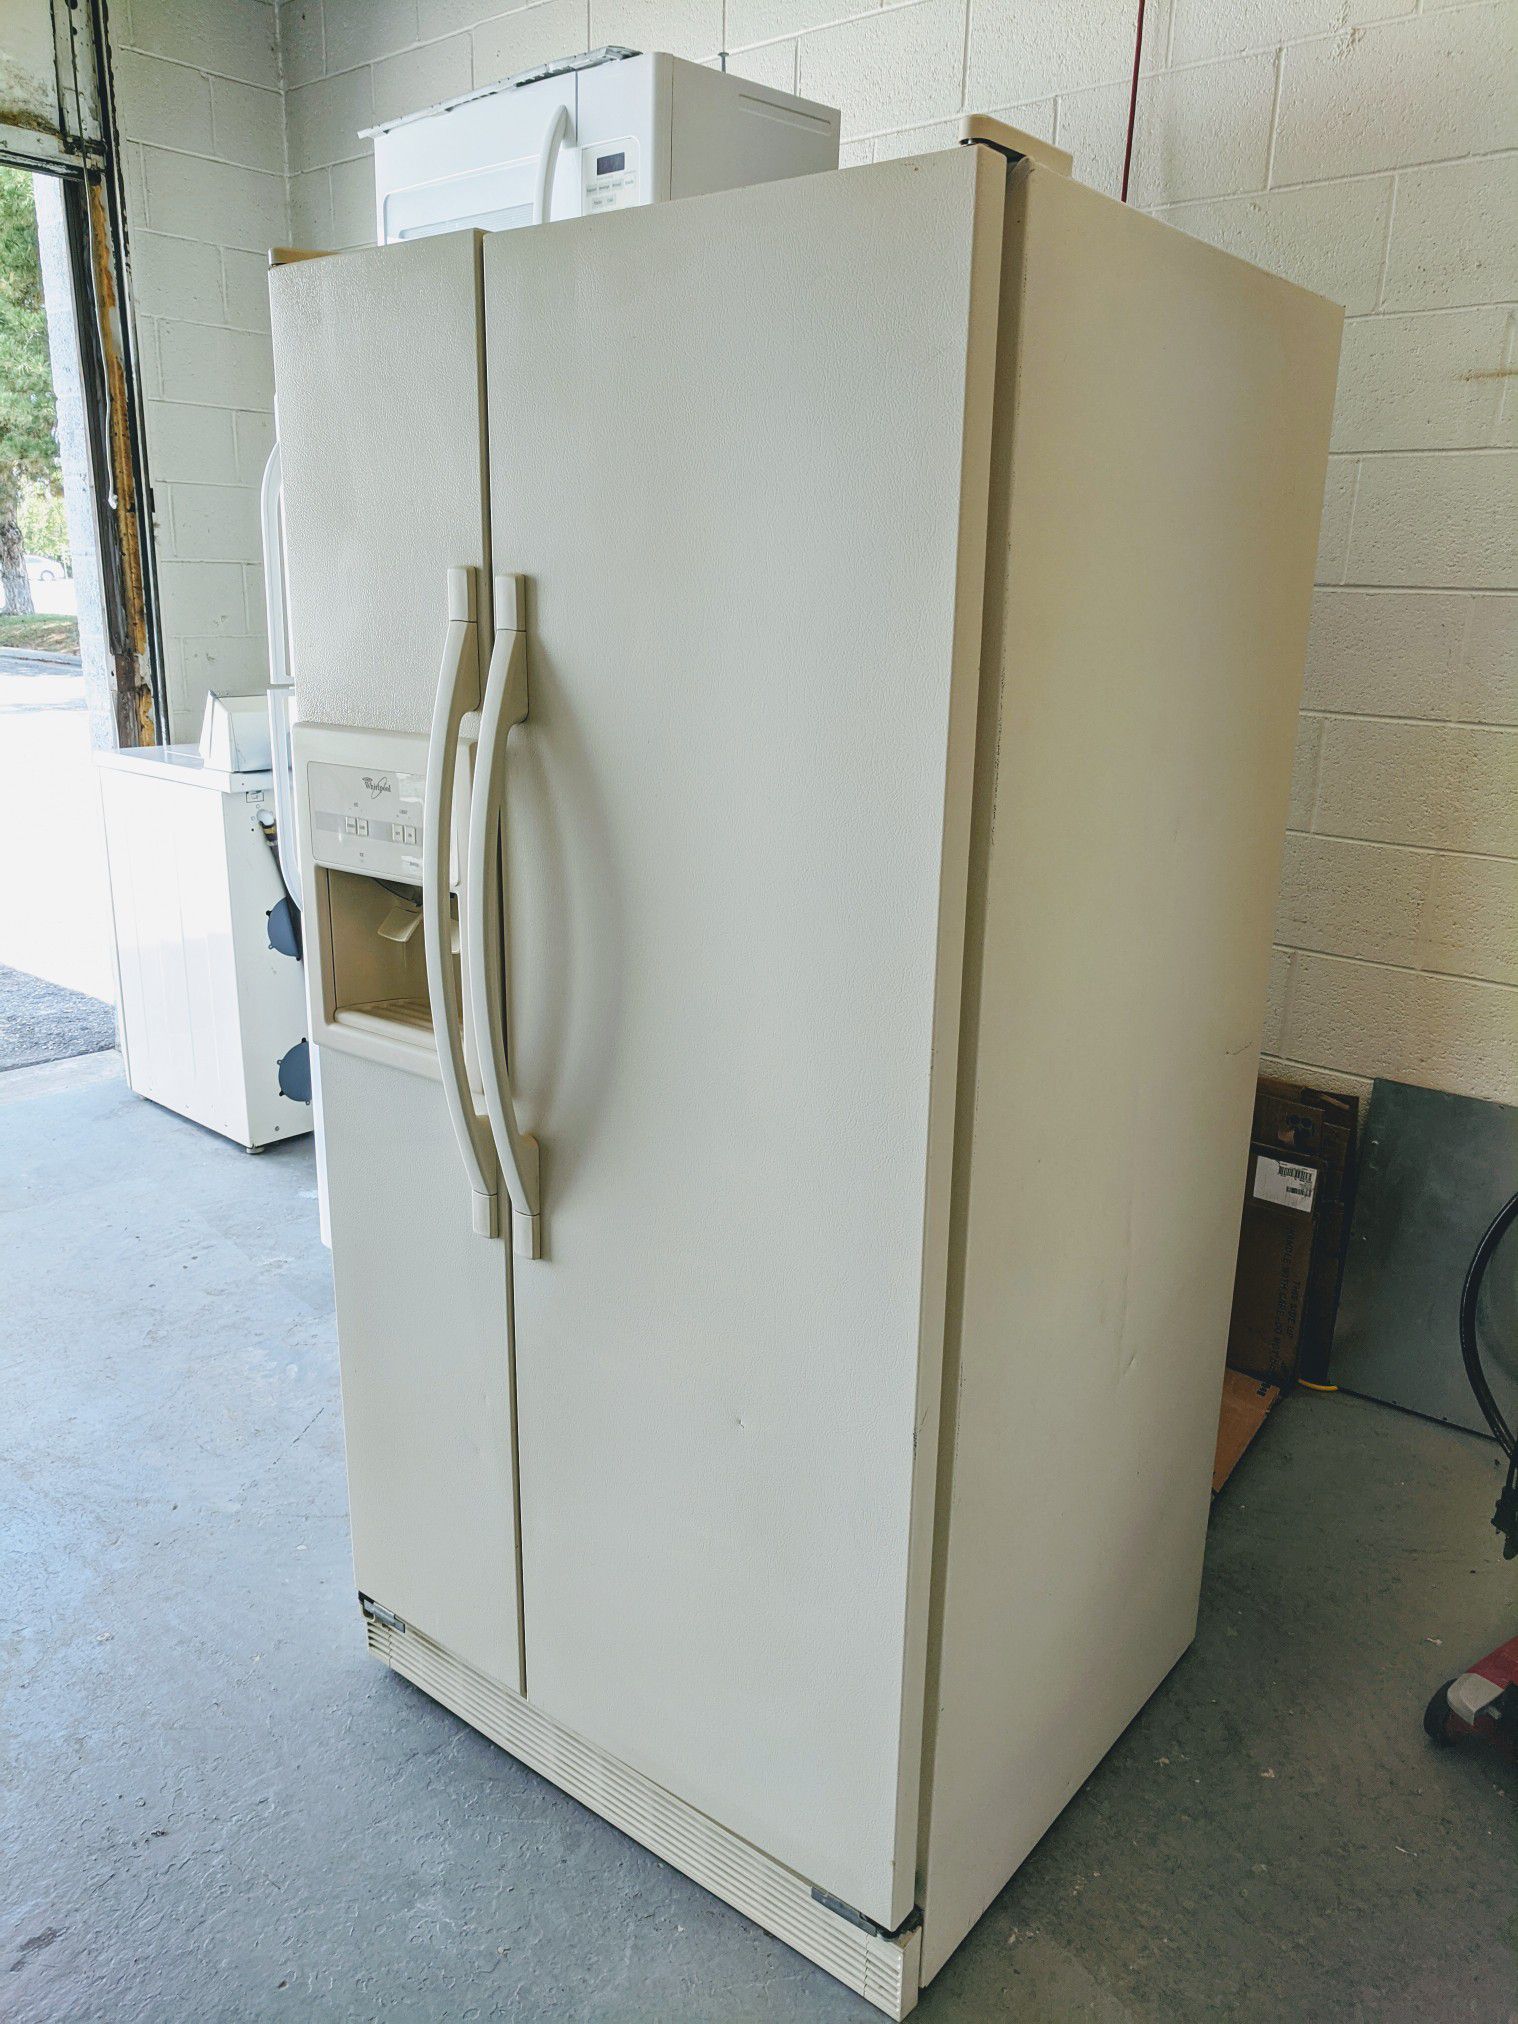 Whirlpool Refrigerator in Great Working Condition - French Door - Delivery Available